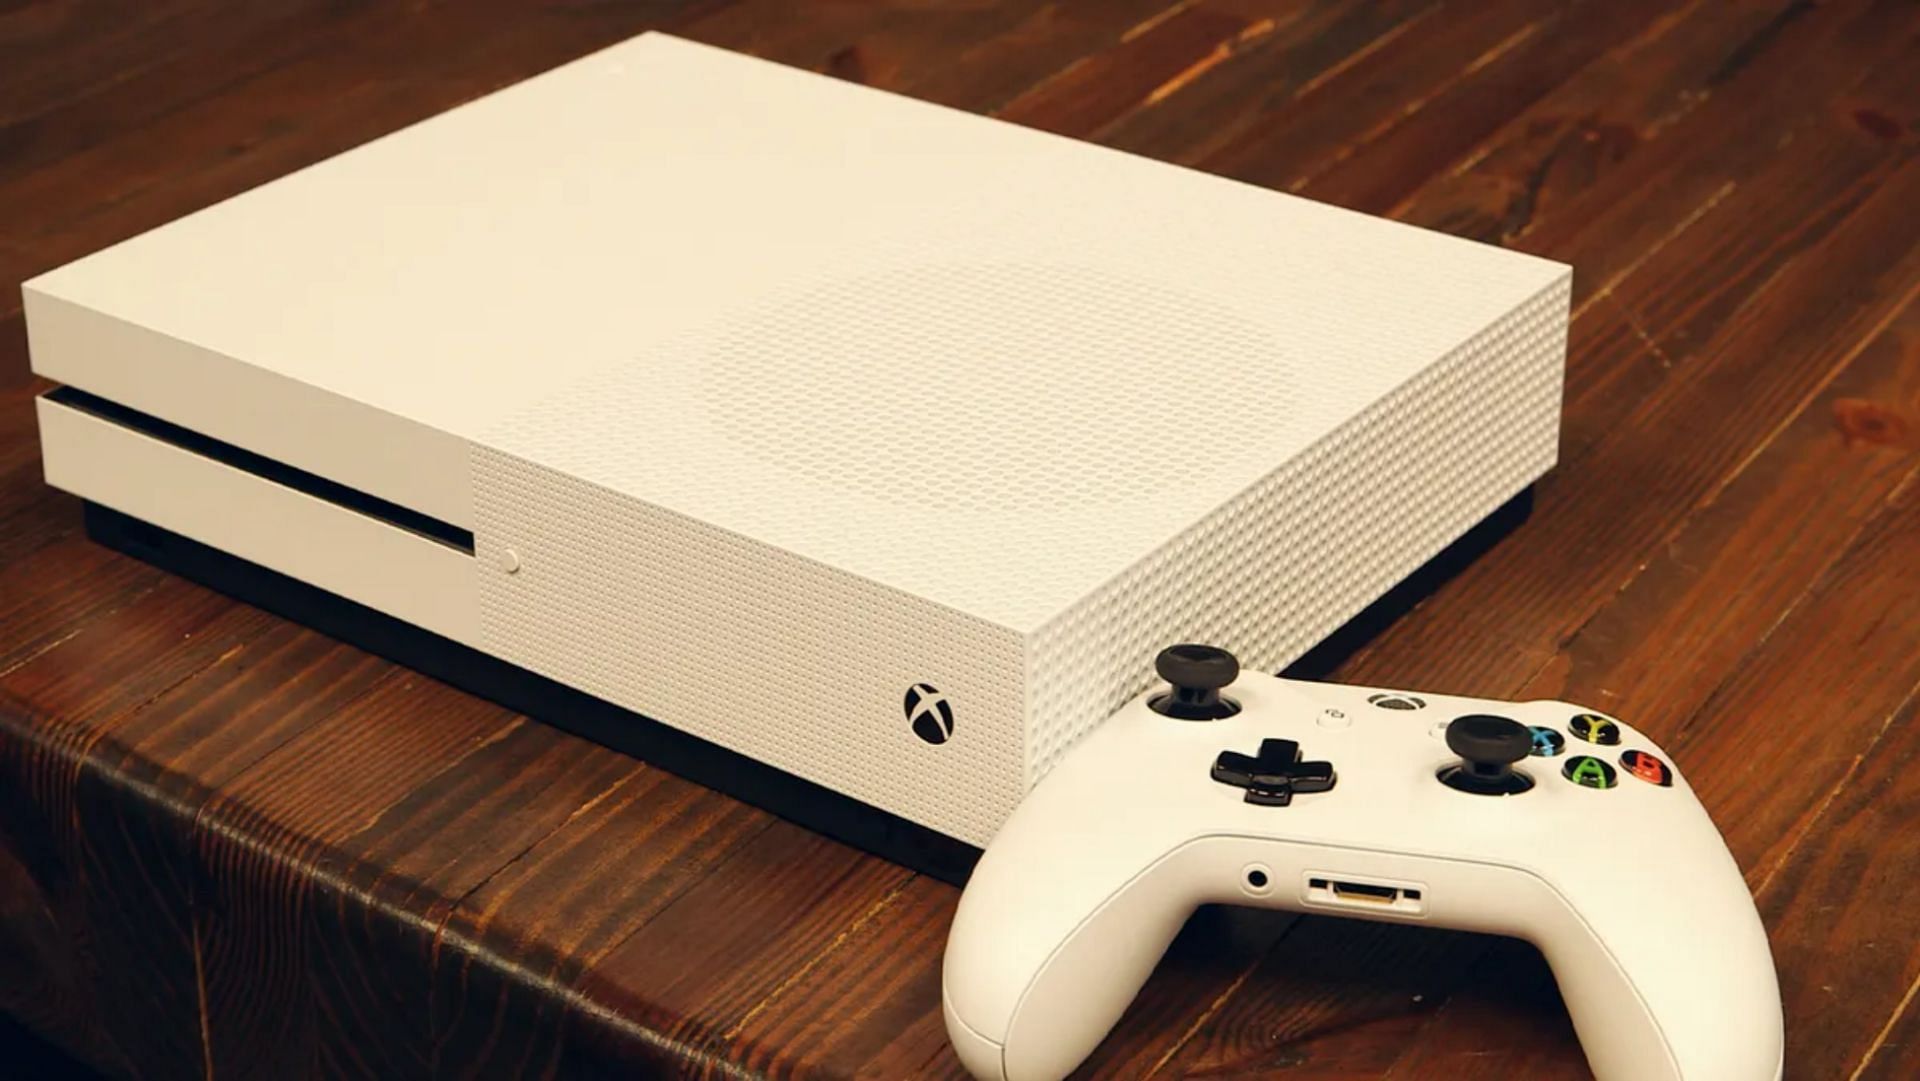 Microsoft ends production of the Xbox One as focus turns to new